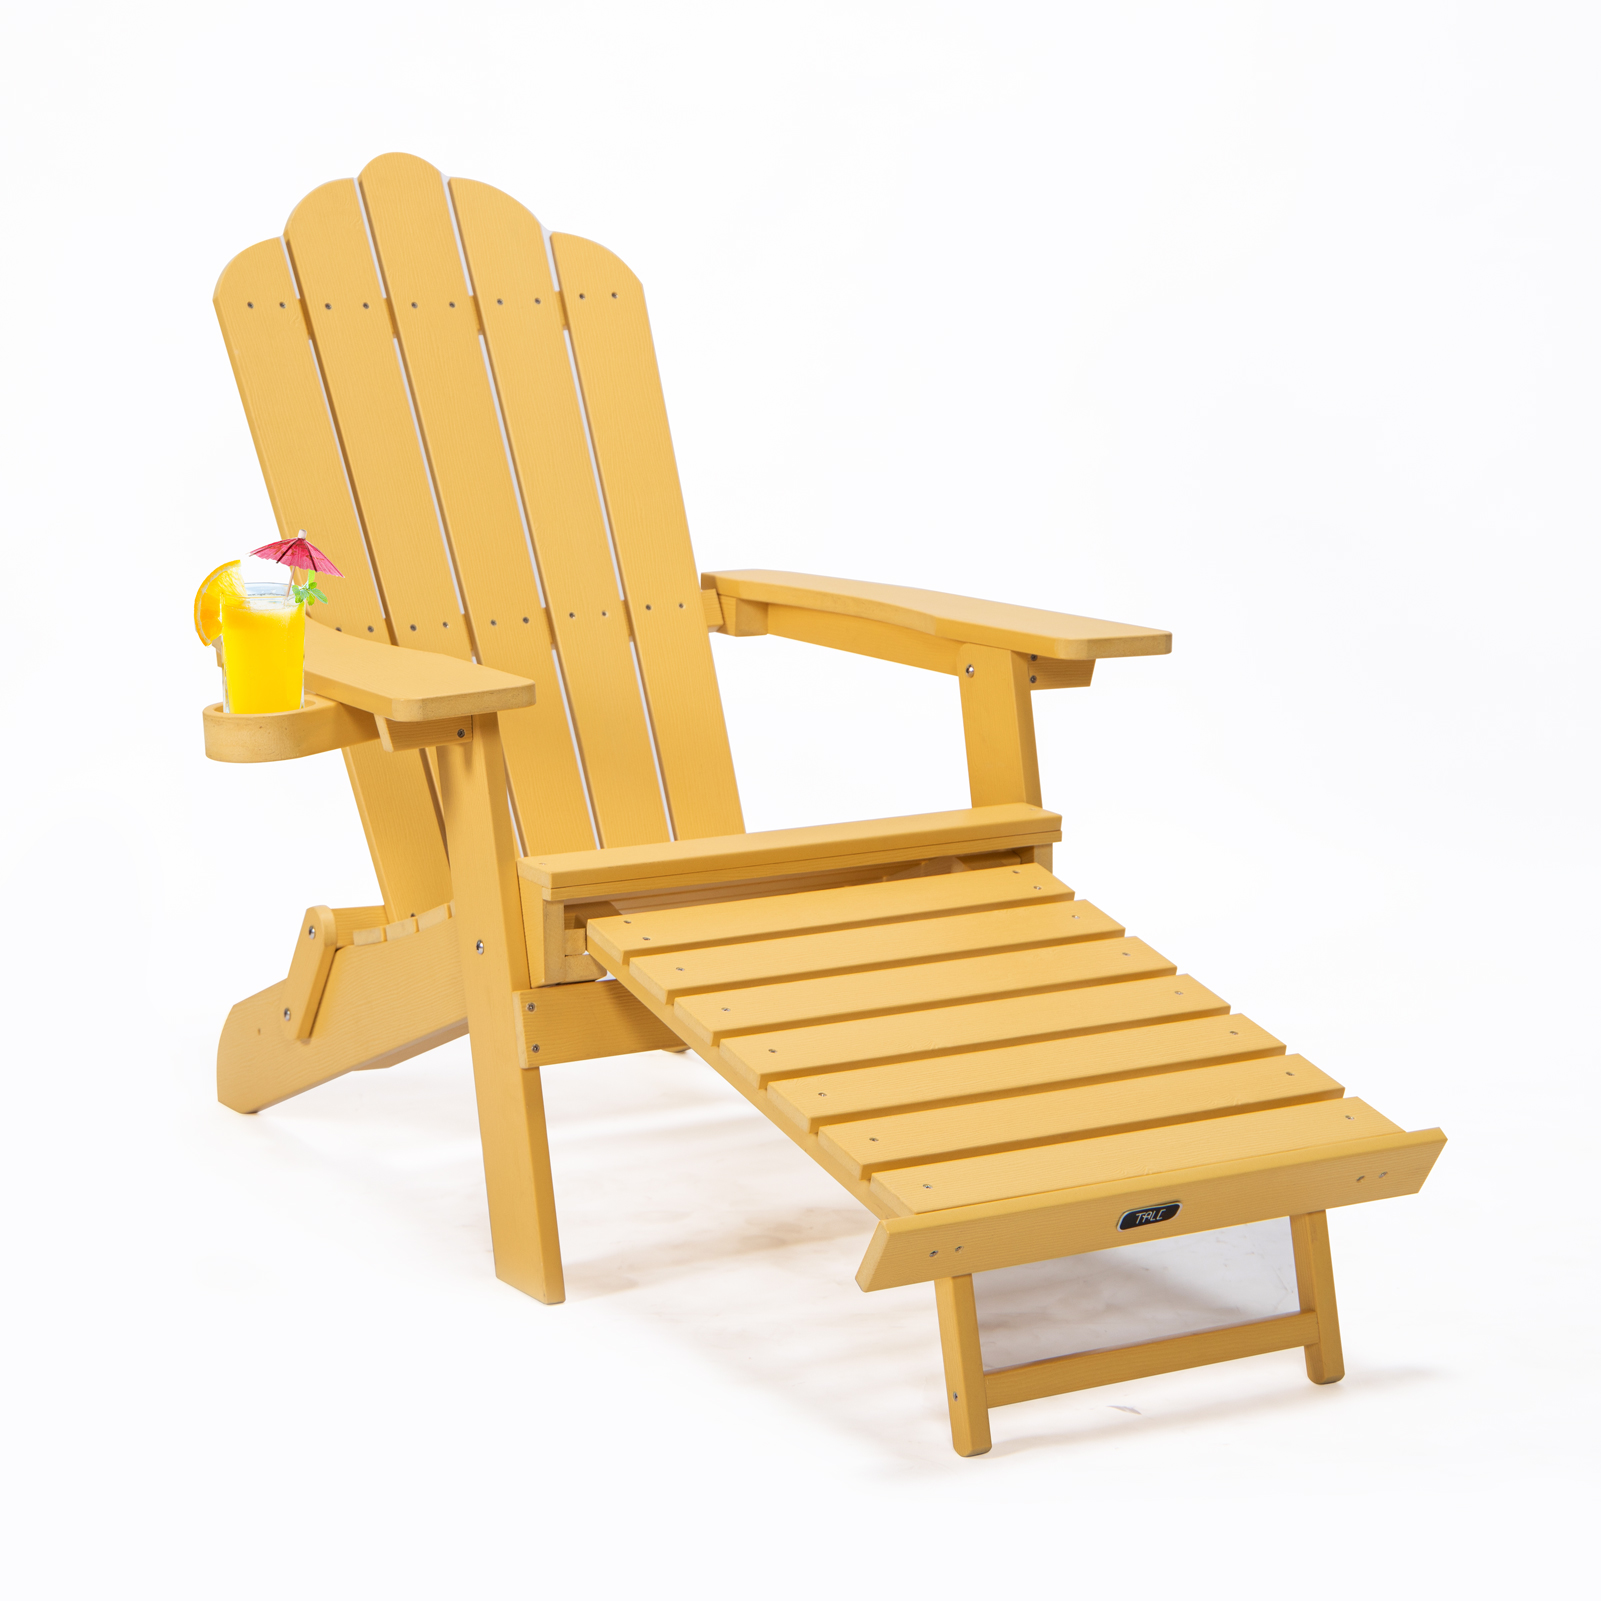 Wood Outdoor Adirondack Chair, Adirondack Chairs Folding Outdoor Patio Chairs, Wooden Accent Lounge Furniture for Yard, Patio - image 1 of 10